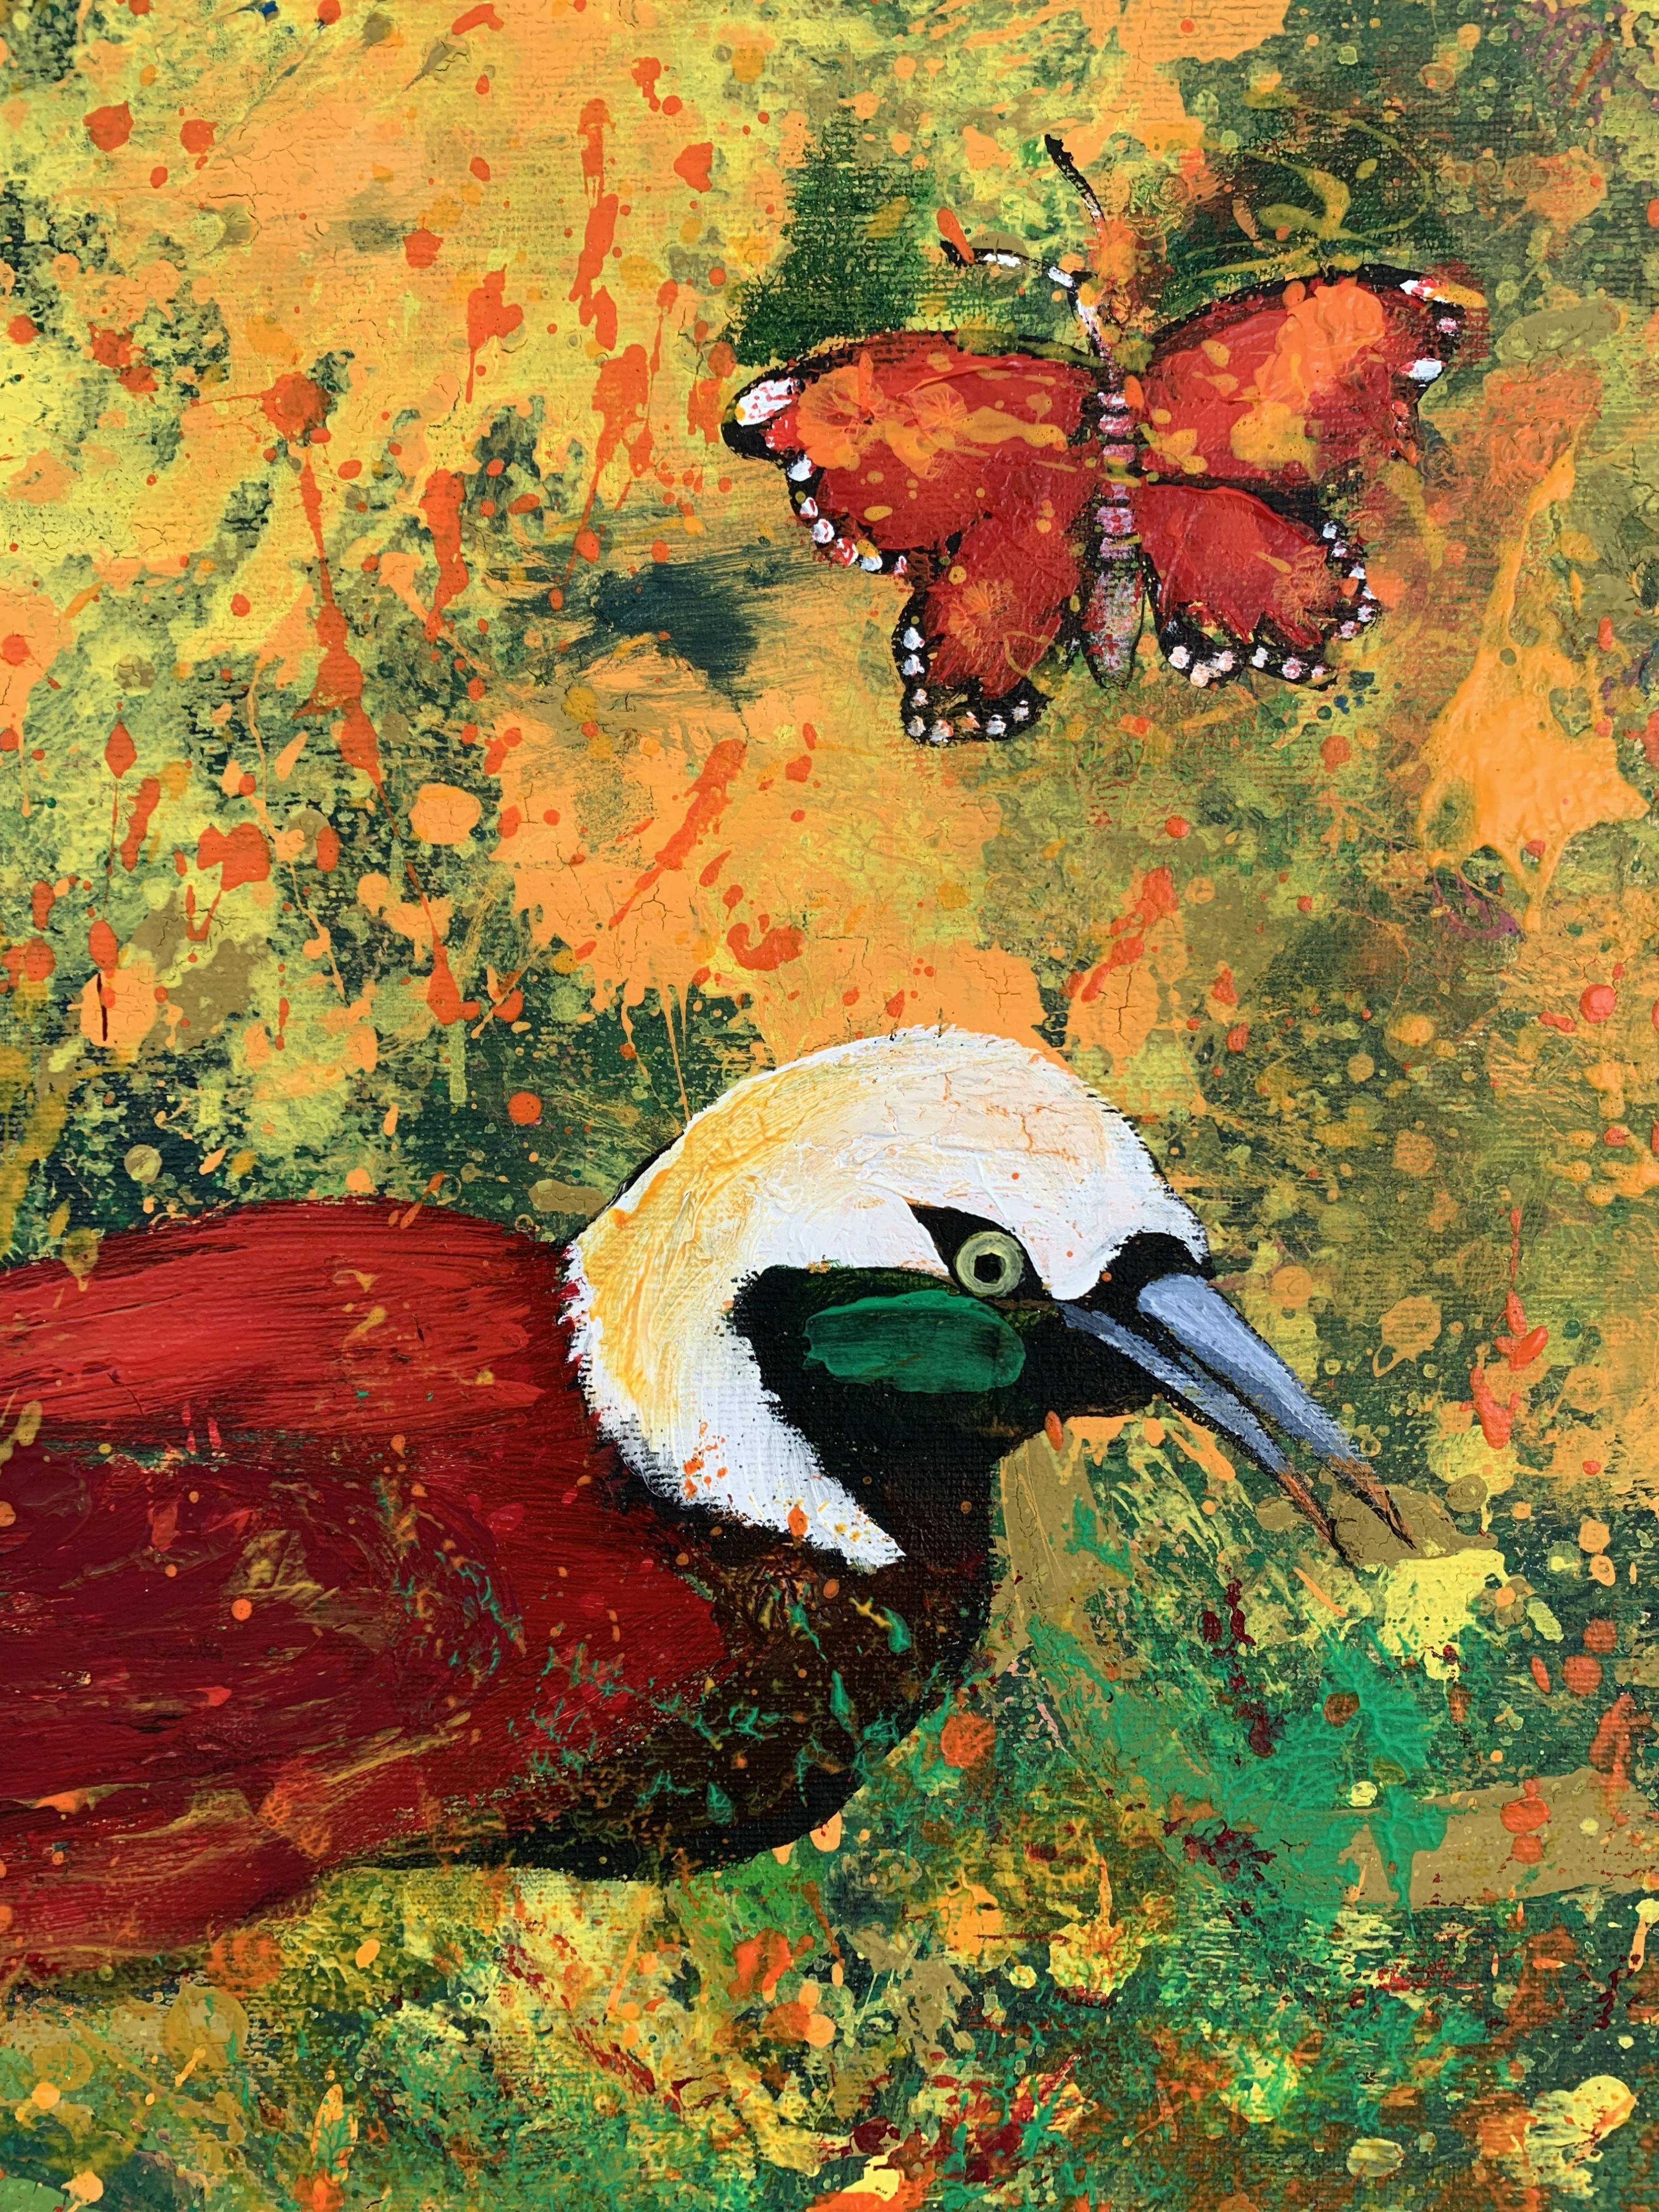 Gardens of Delight LVII - XXI century figurative oil painting, Birds, Colorful - Black Figurative Painting by Magdalena Nałęcz